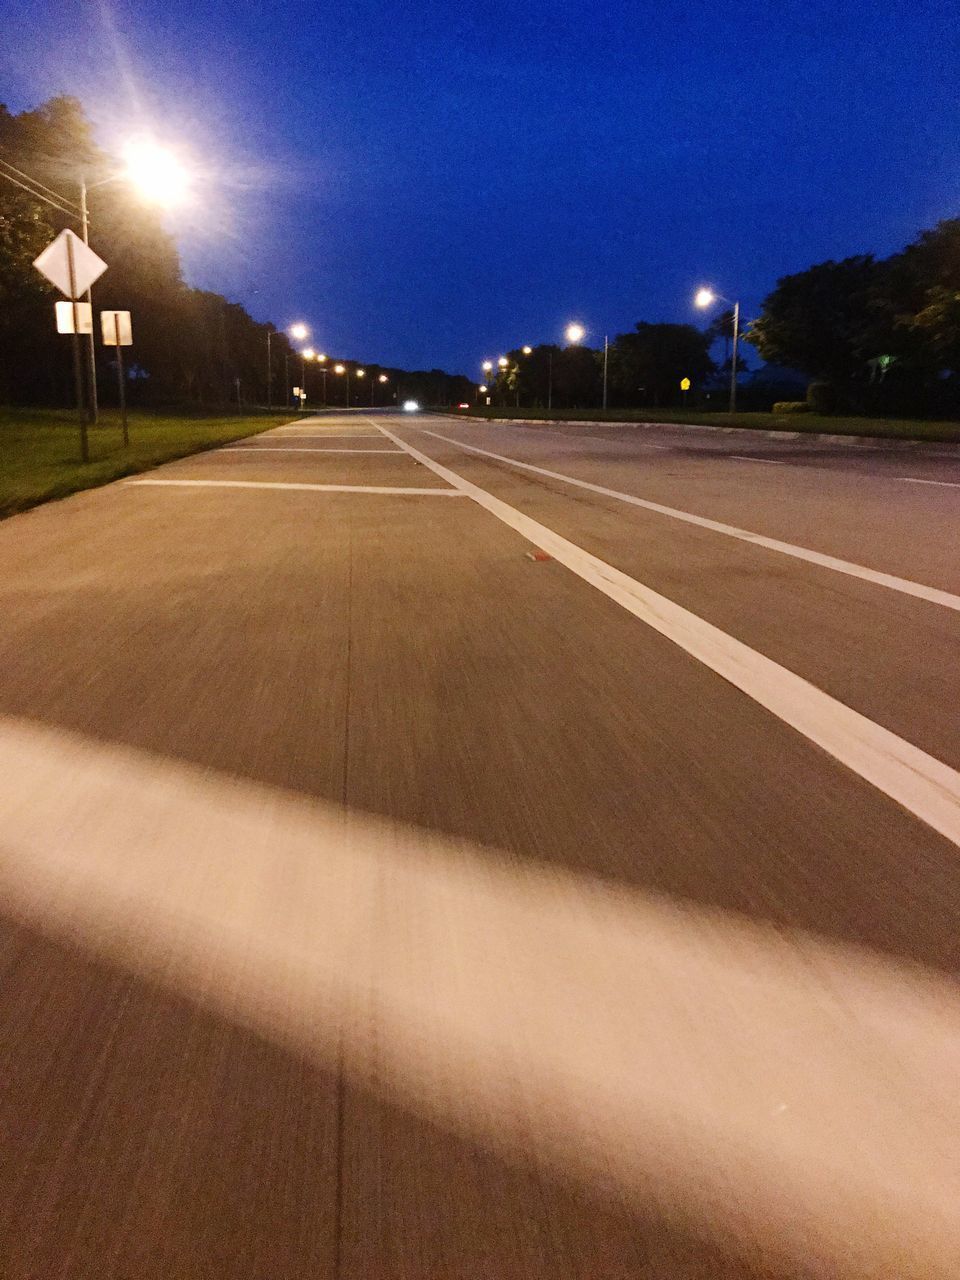 VIEW OF EMPTY ROAD ALONG NIGHT